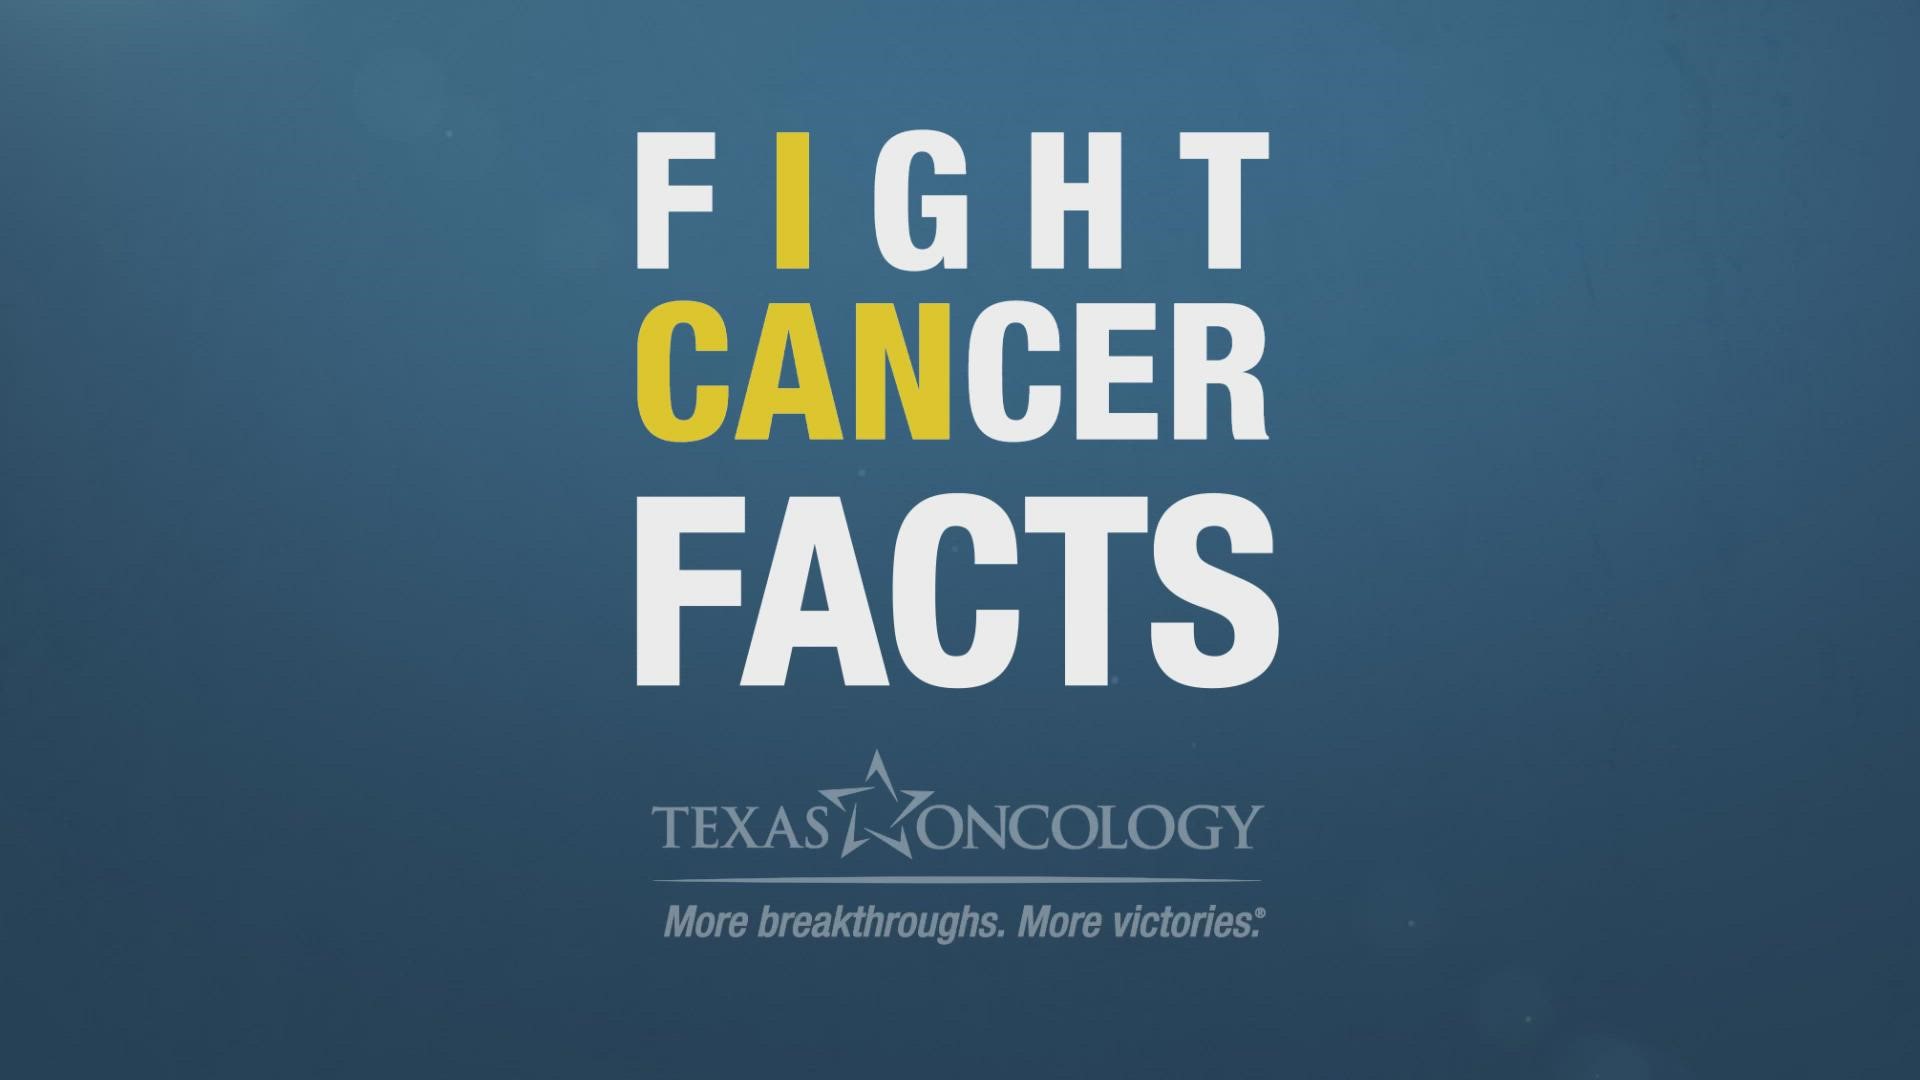 Local Texas Oncology doctor explains how early detection and screenings are valuable tools to diagnose cancer at its earliest stages.